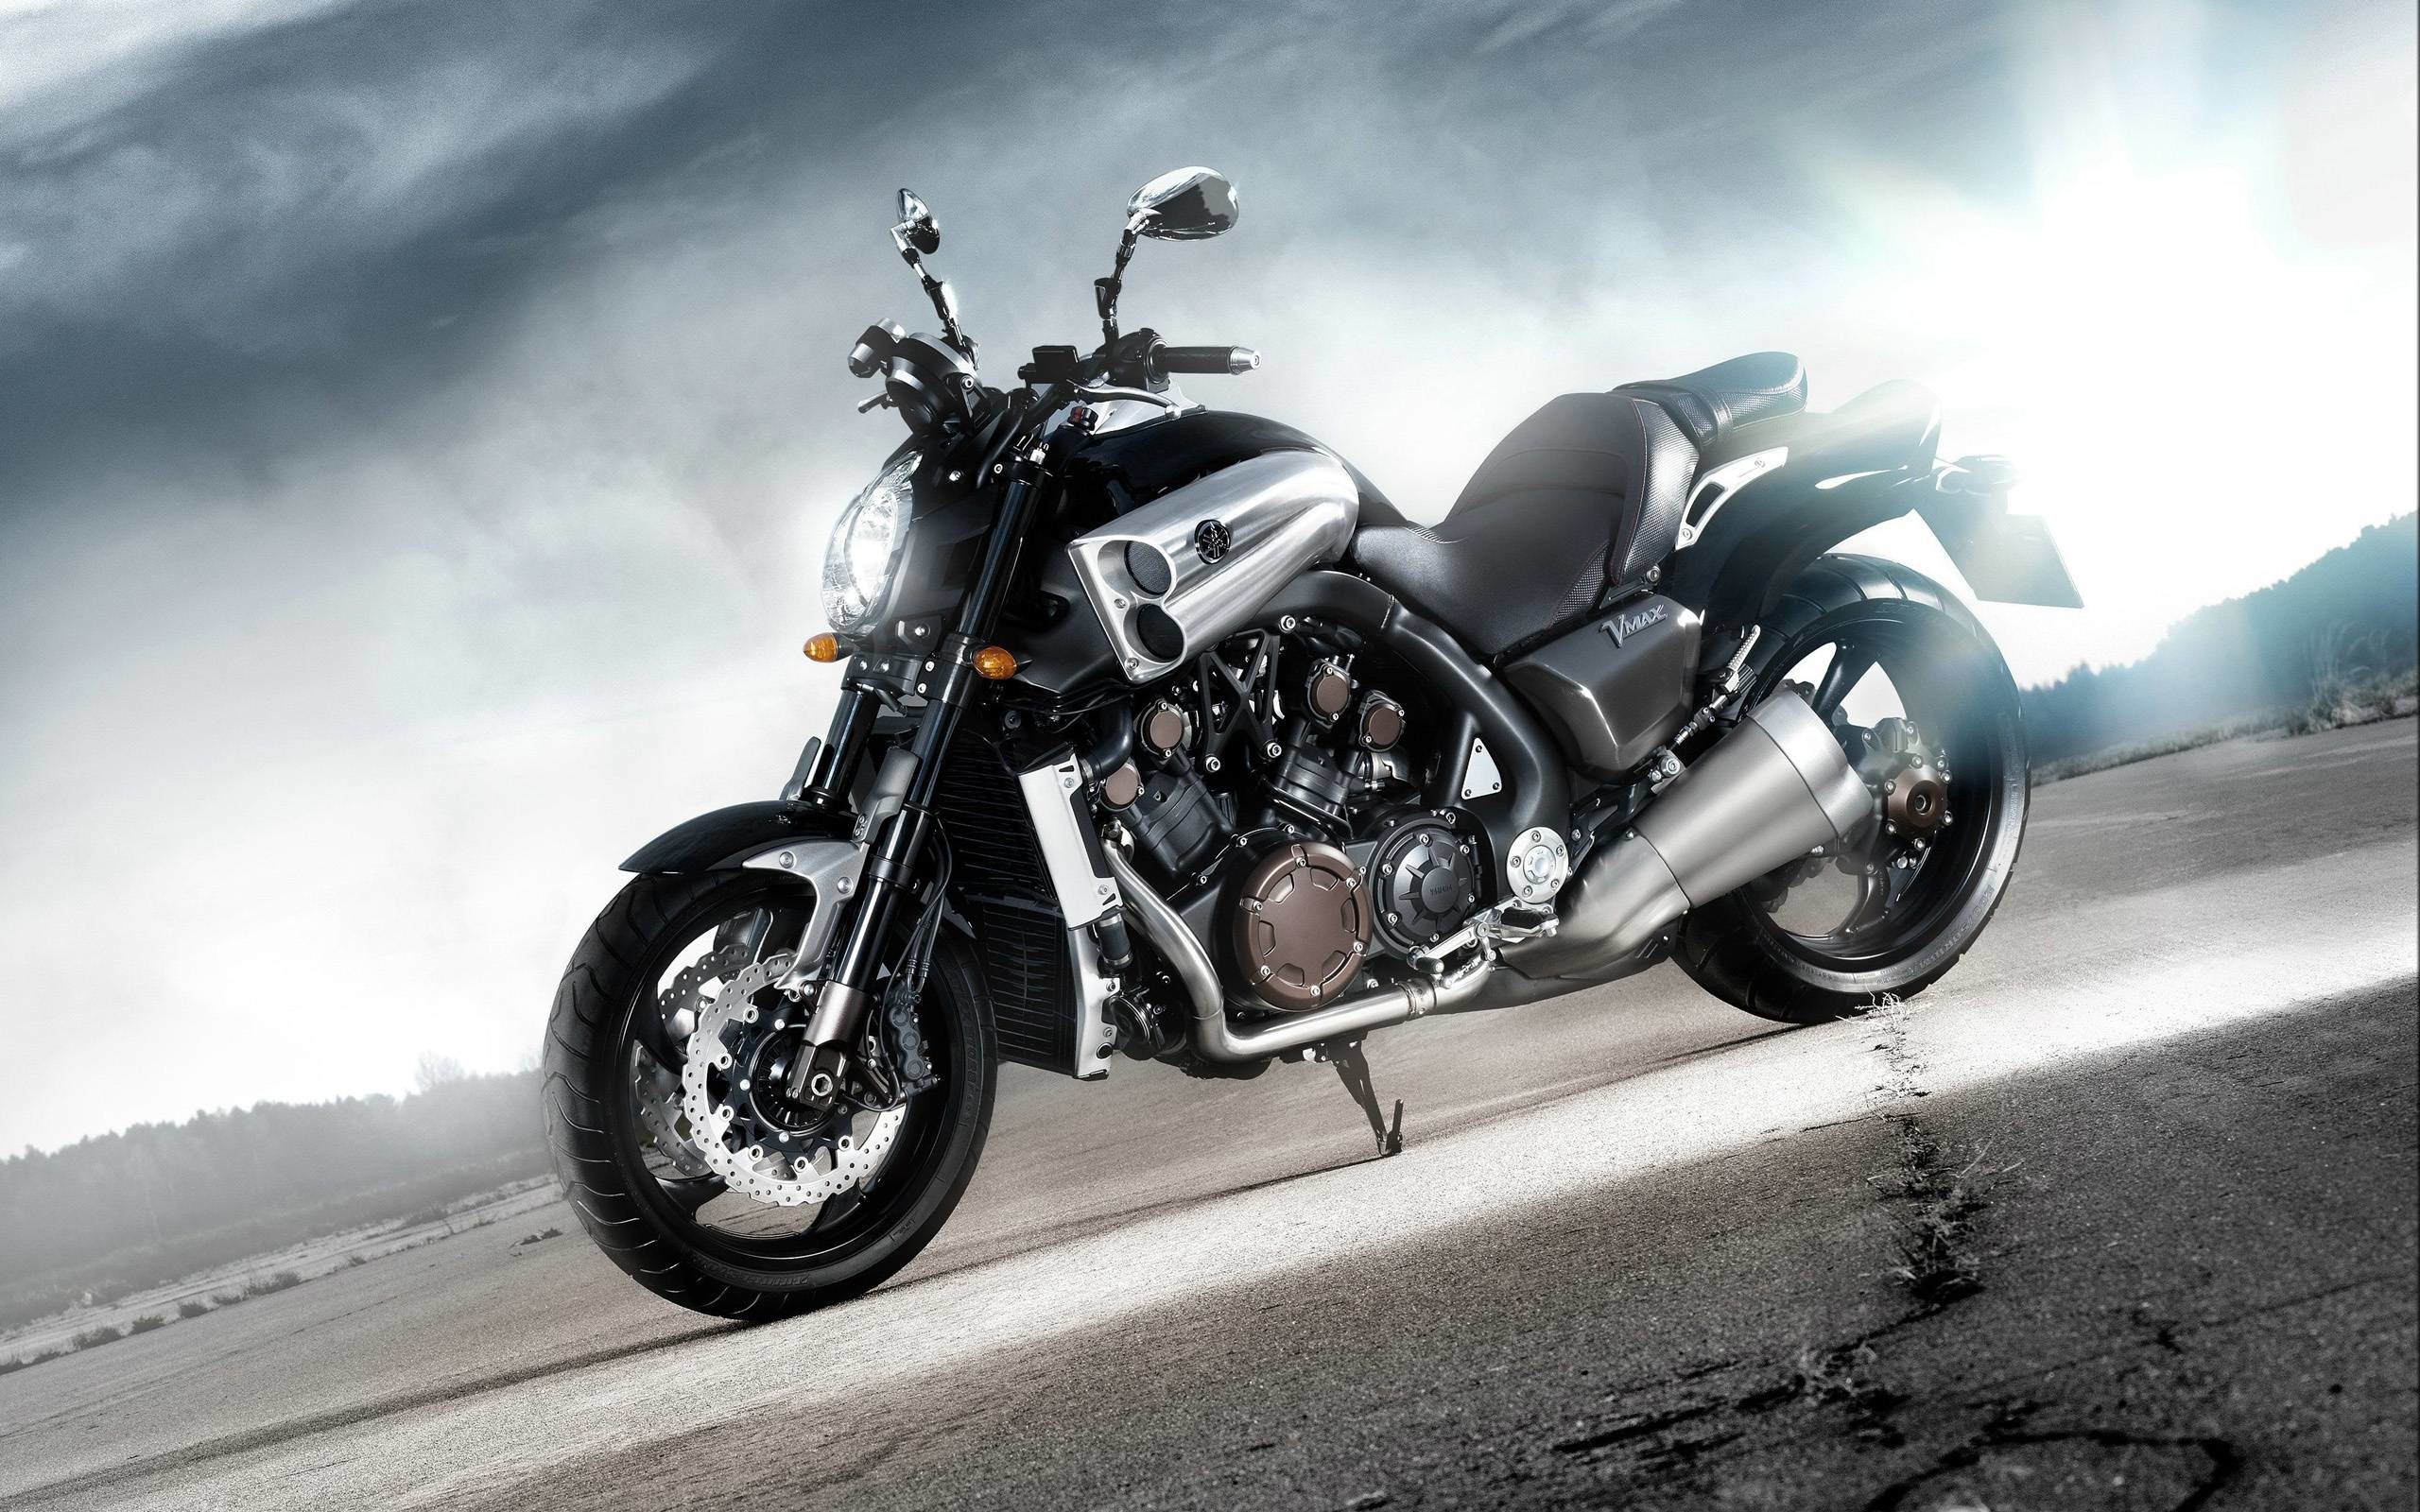 Harley-Davidson Full HD Wallpaper and Background Image 